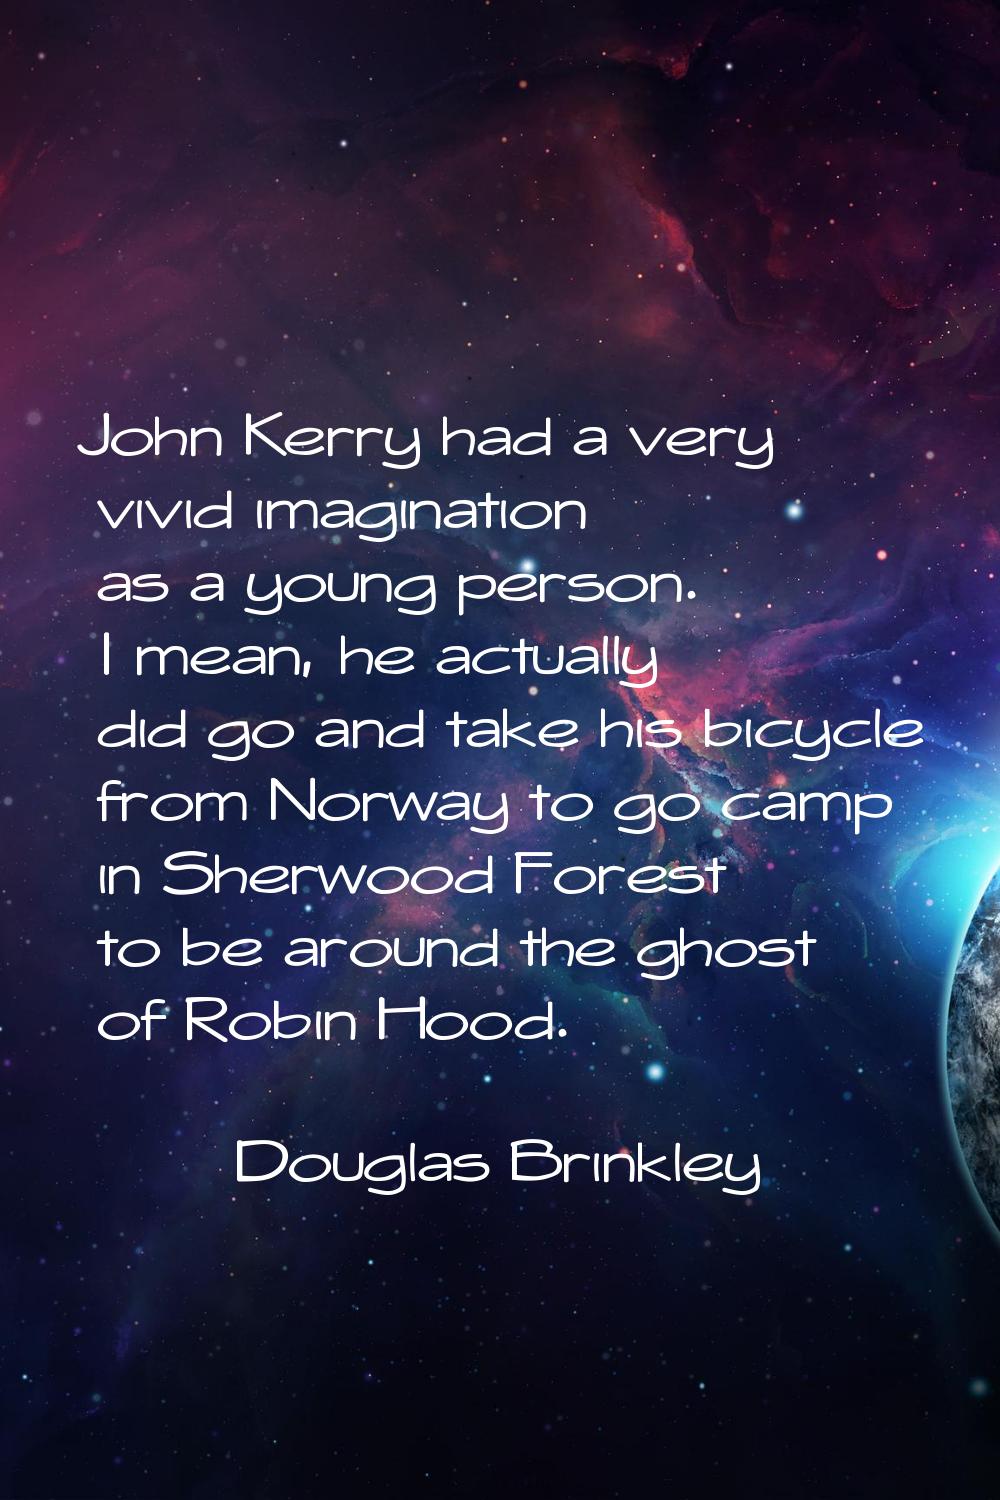 John Kerry had a very vivid imagination as a young person. I mean, he actually did go and take his 